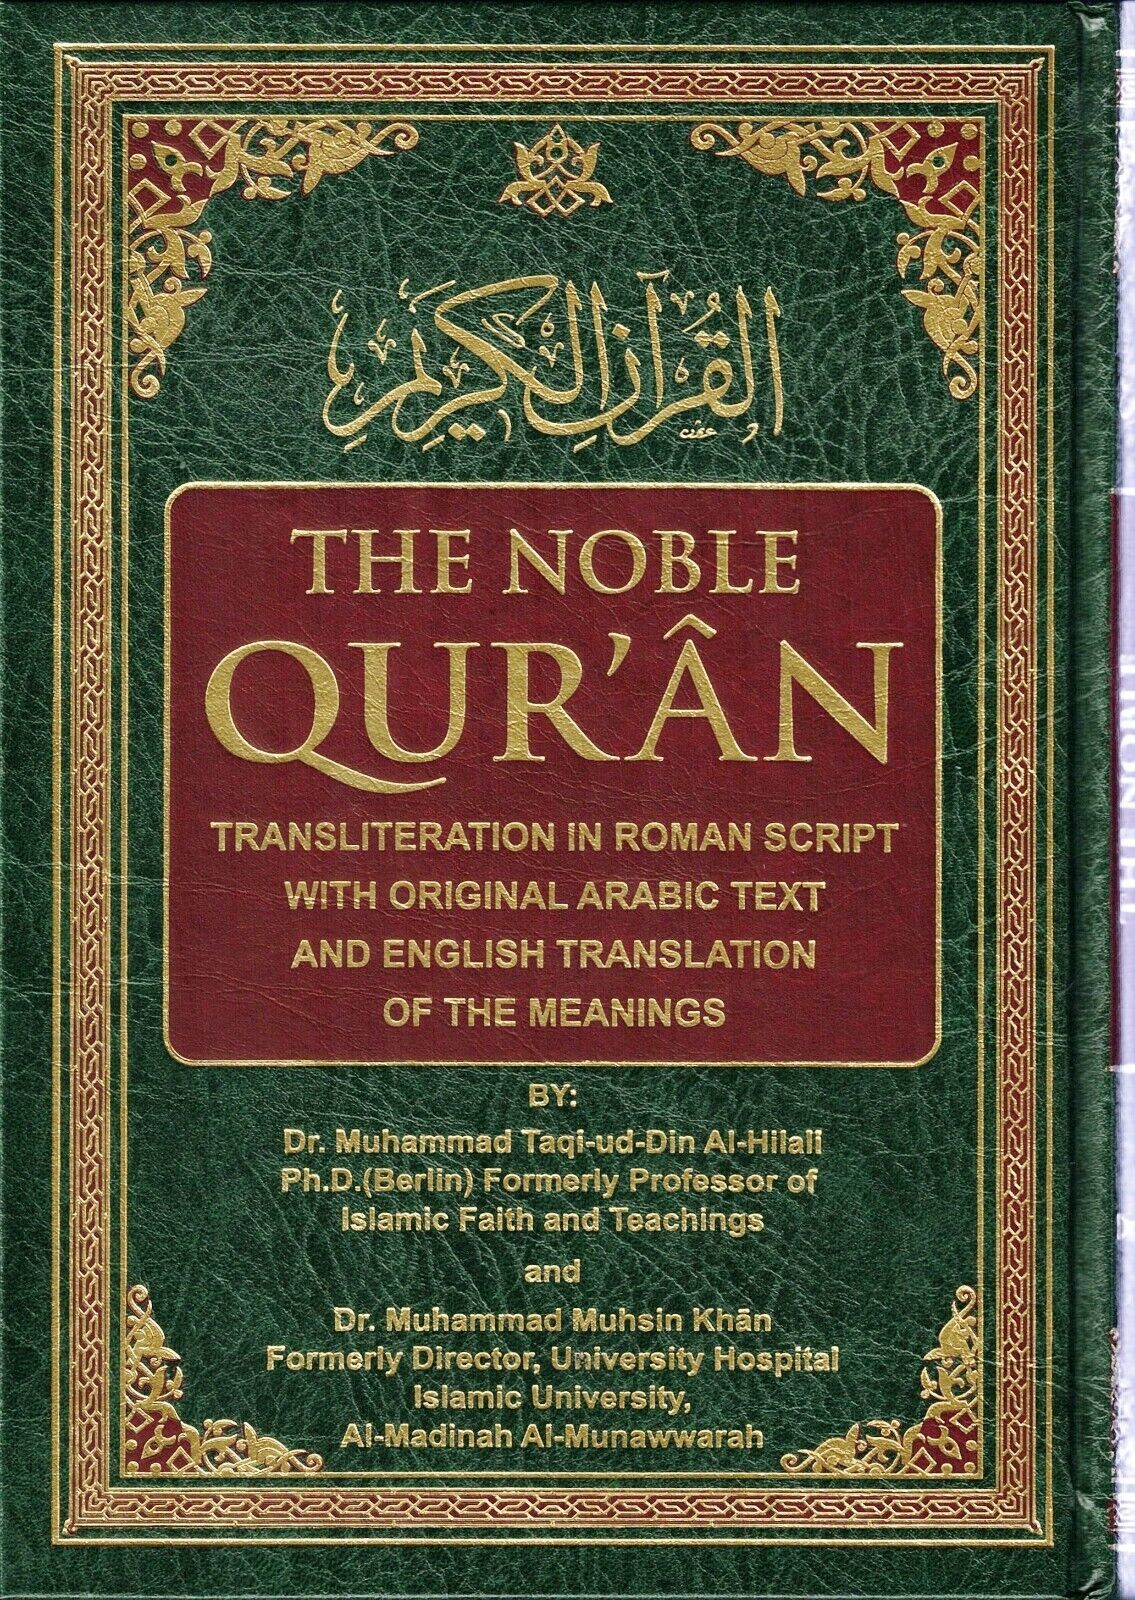 The Noble Quran, Transliteration in Roman Script with Arabic Text and English